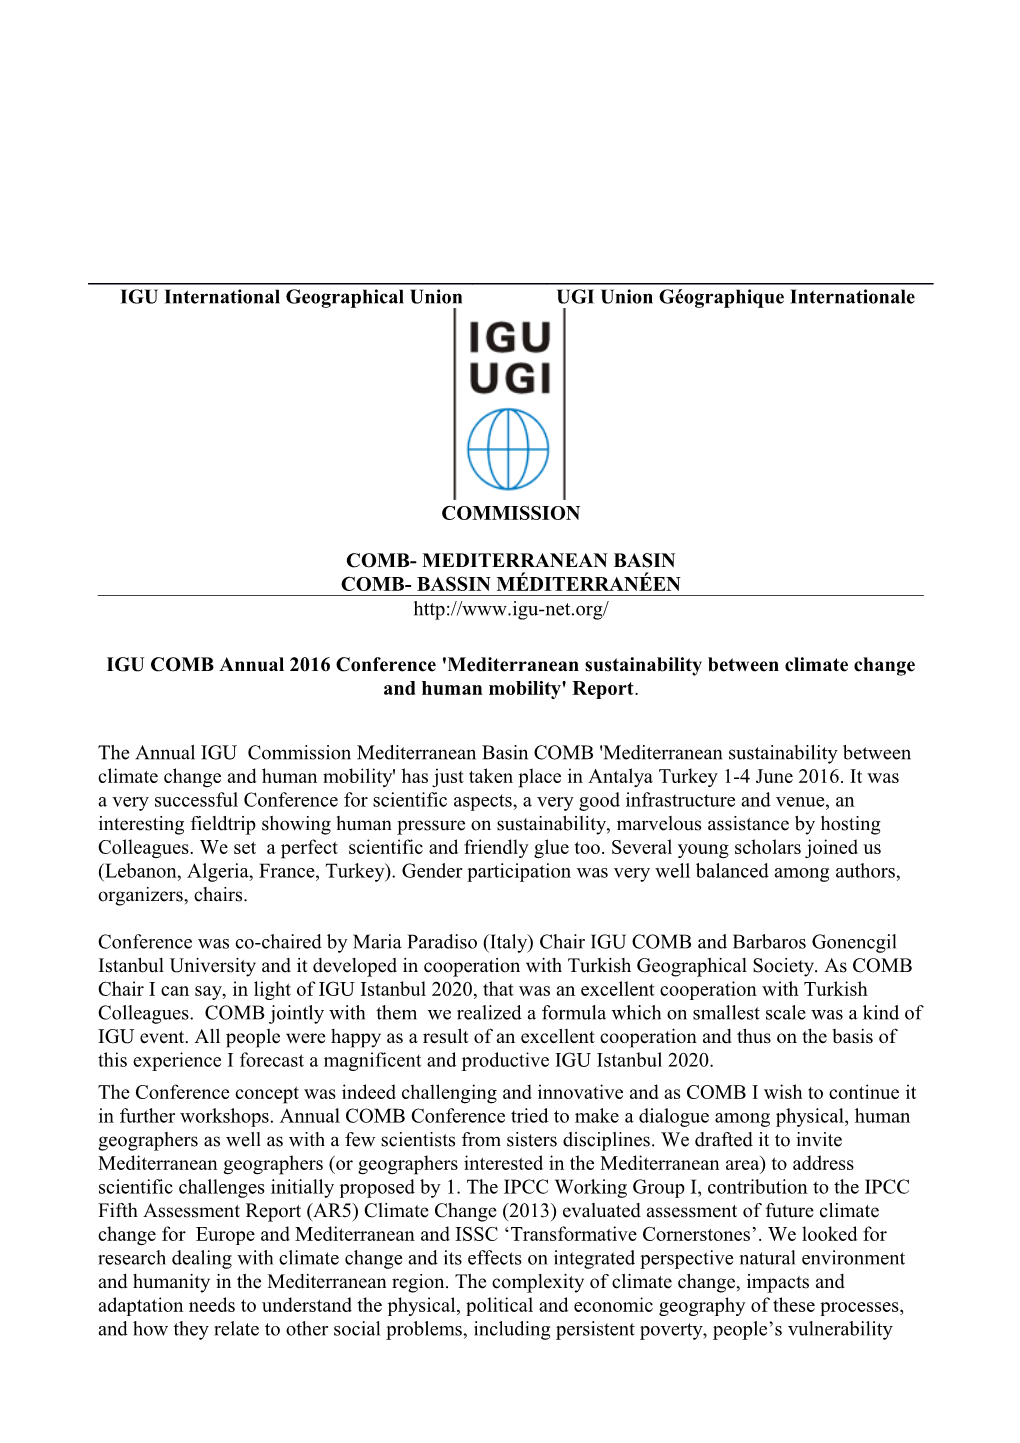 COMB-Commission on Mediterranean Basin Is Part of the IGU